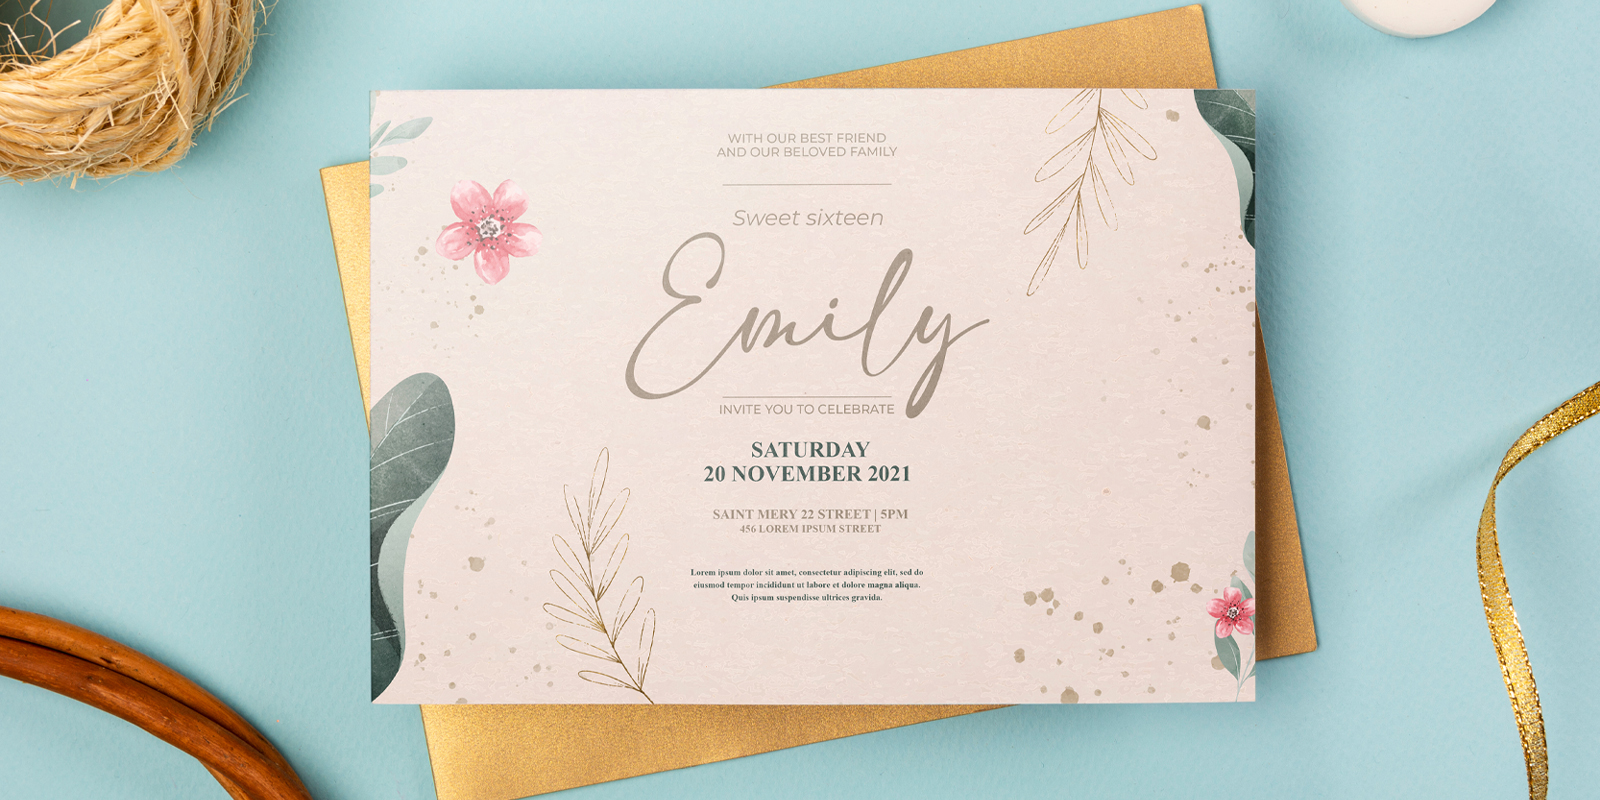 Invitations in Berlin - Print with Pagerr